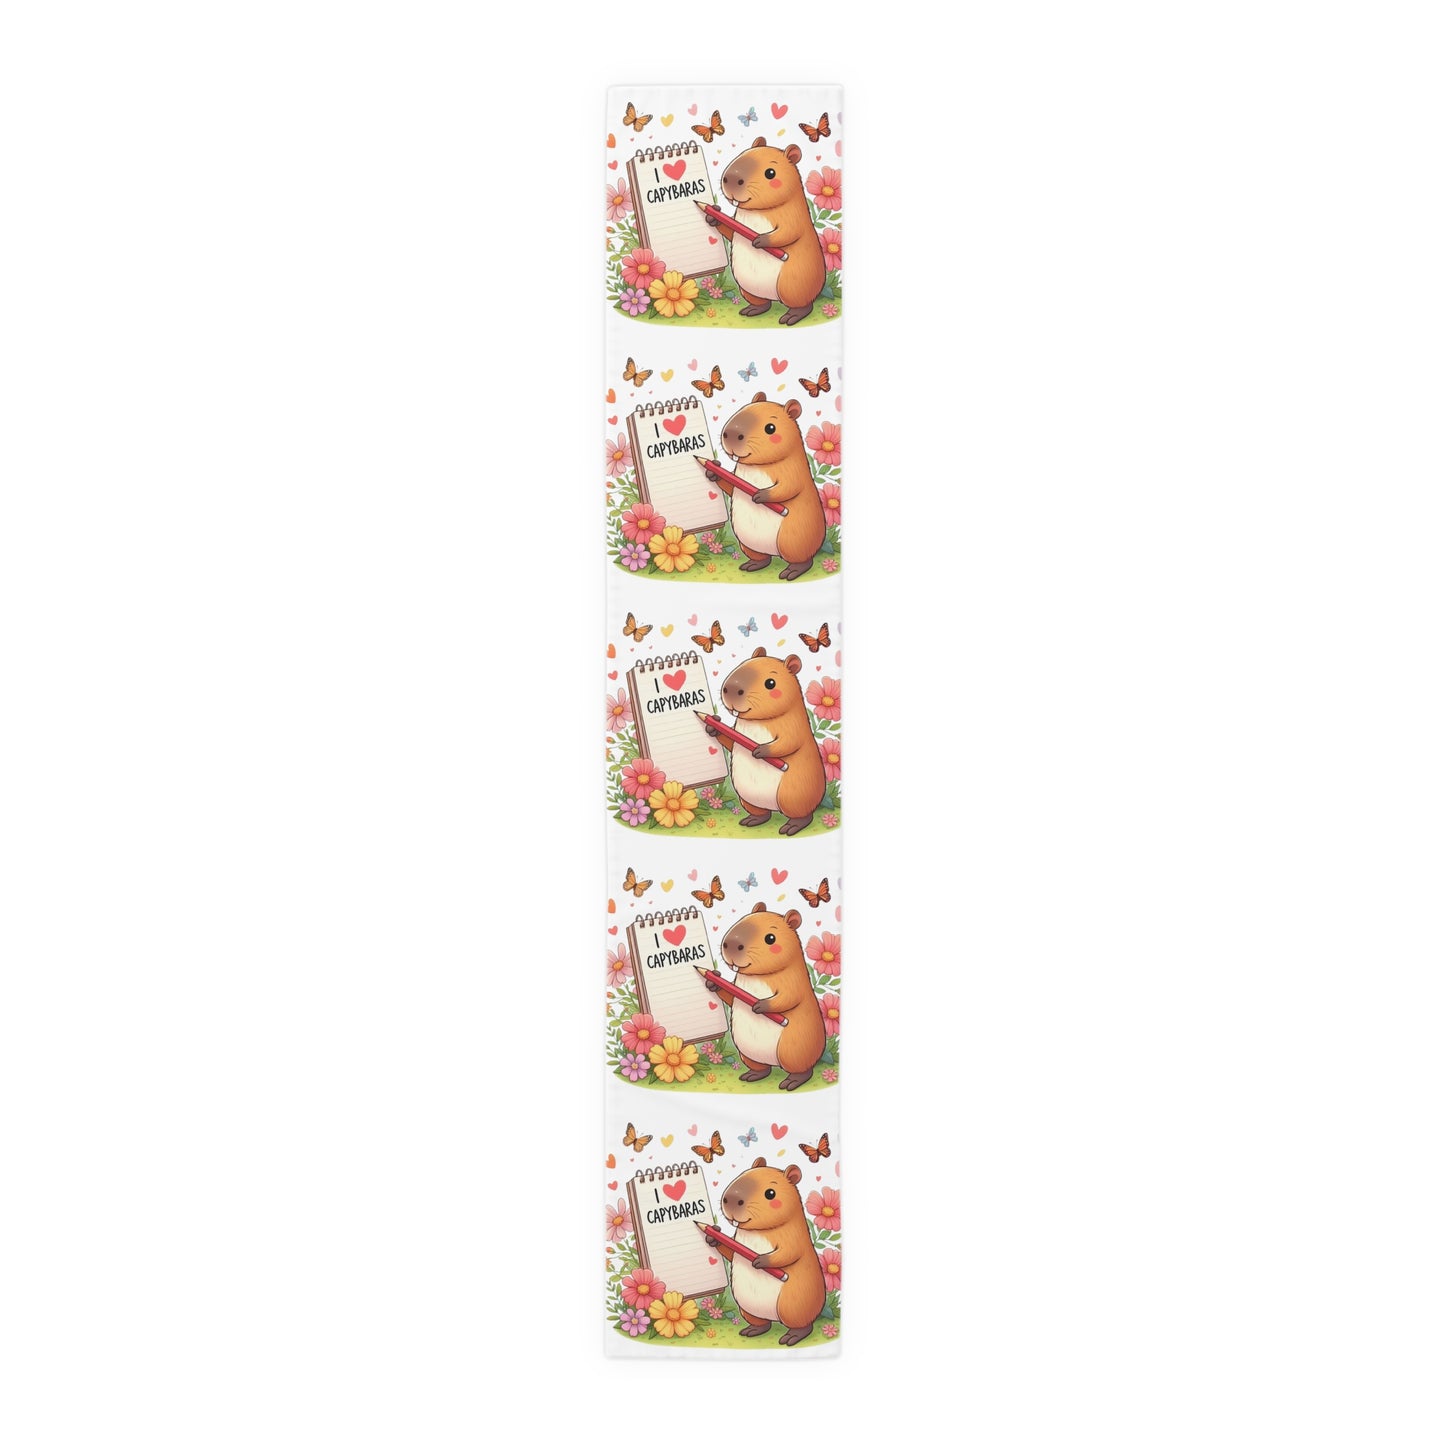 Capybara Holding Pencil and Notepad with I Love Capybaras, Cute Rodent Surrounded by Flowers and Butterflies, Table Runner (Cotton, Poly)